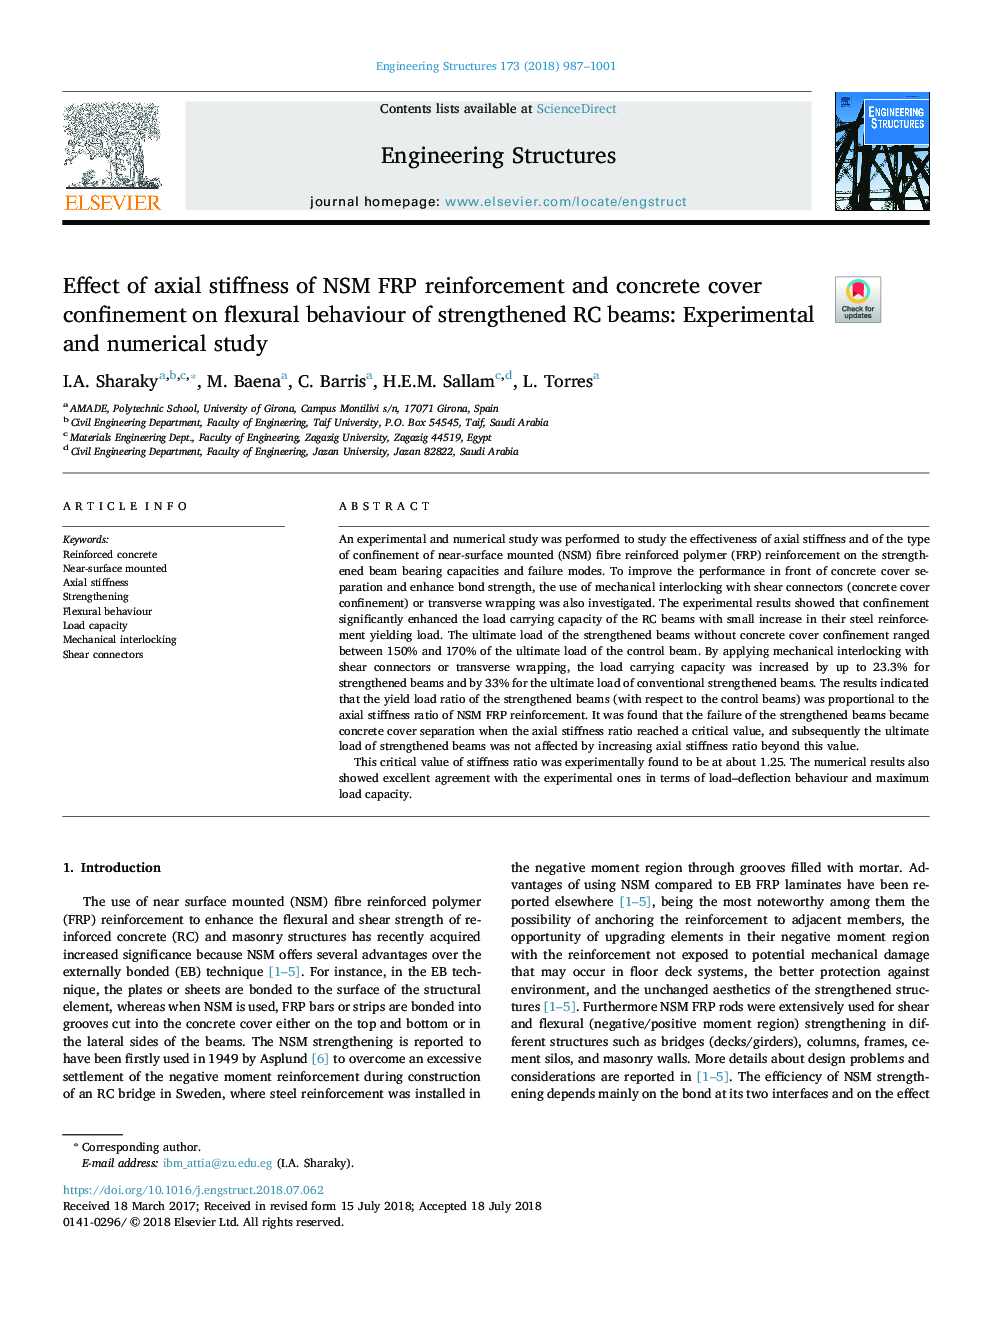 Effect of axial stiffness of NSM FRP reinforcement and concrete cover confinement on flexural behaviour of strengthened RC beams: Experimental and numerical study